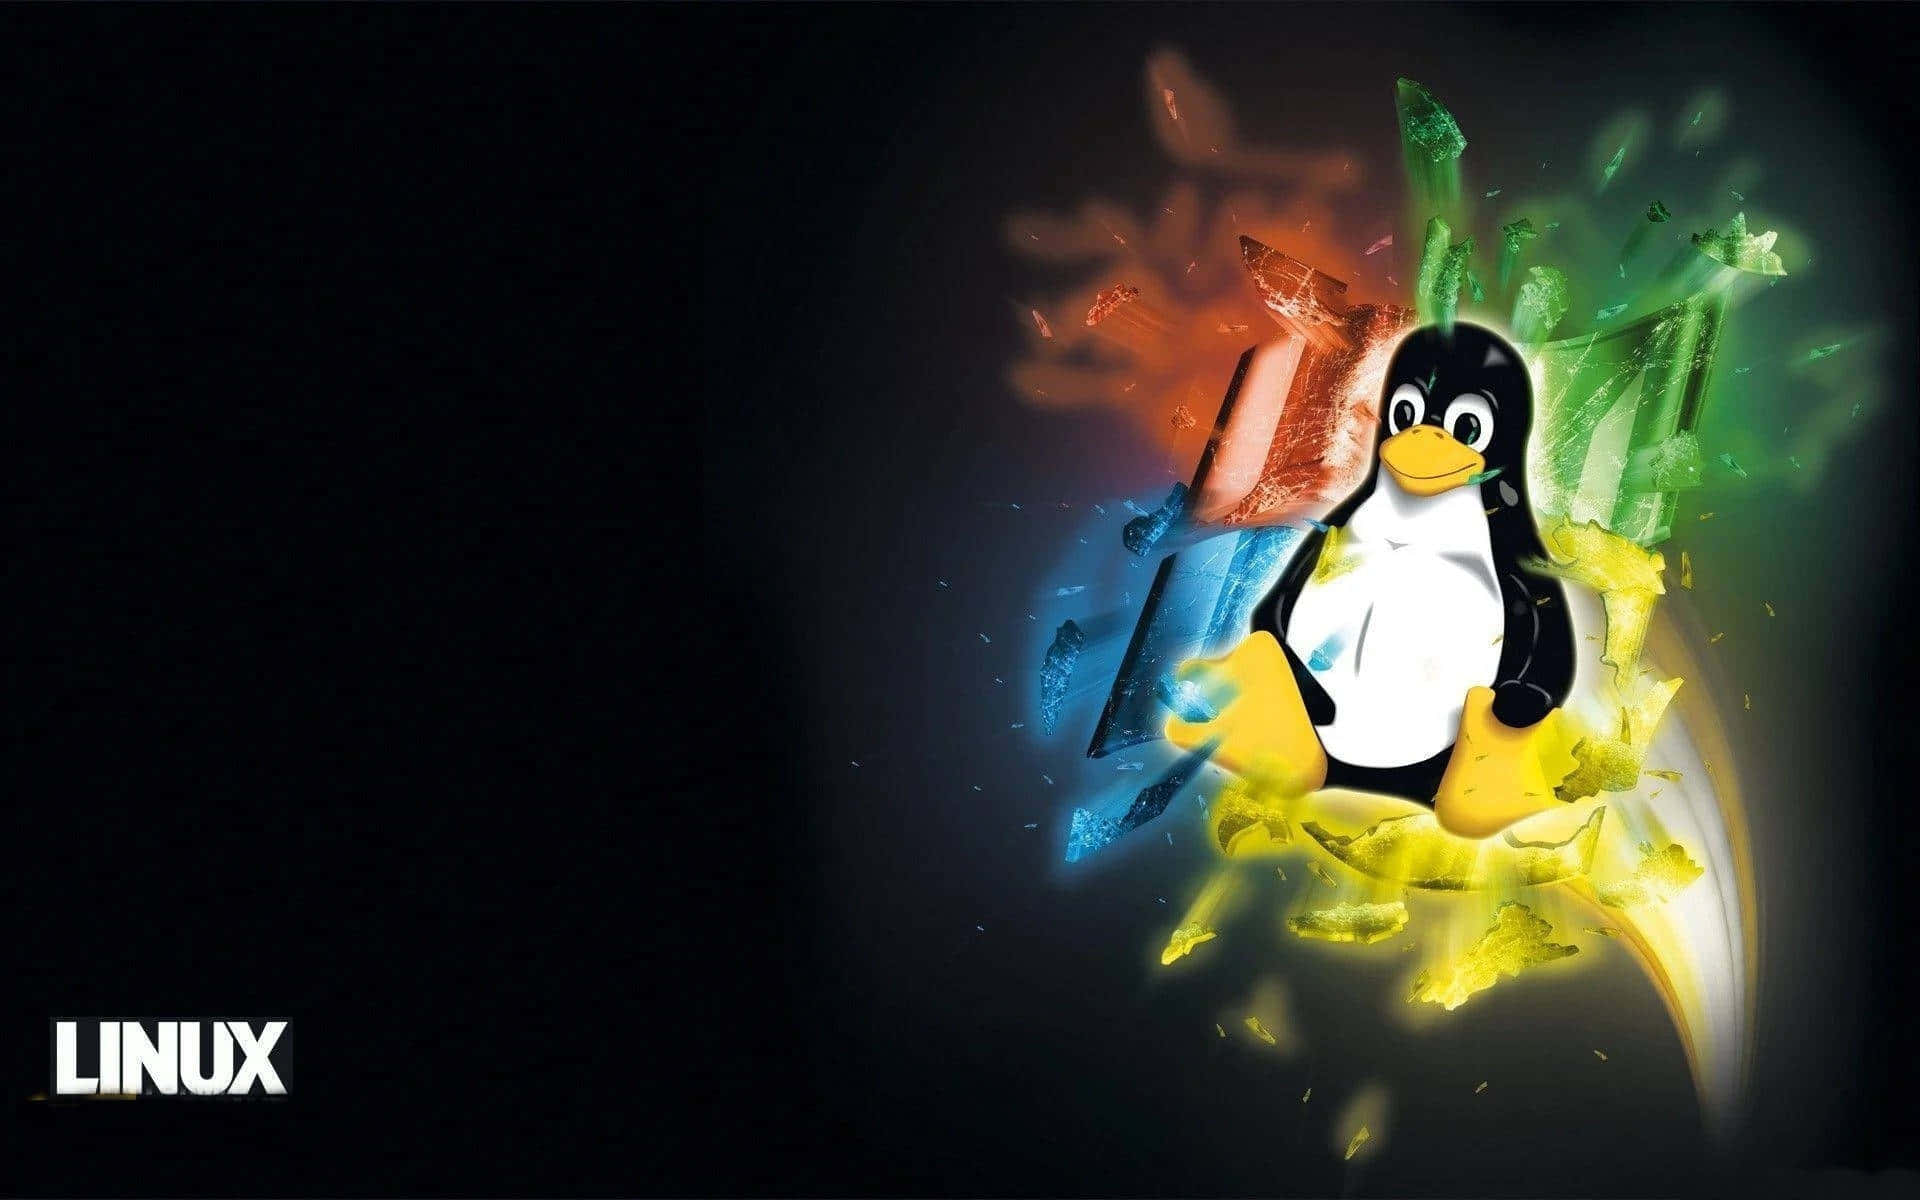 Explore the incredible world of Linux